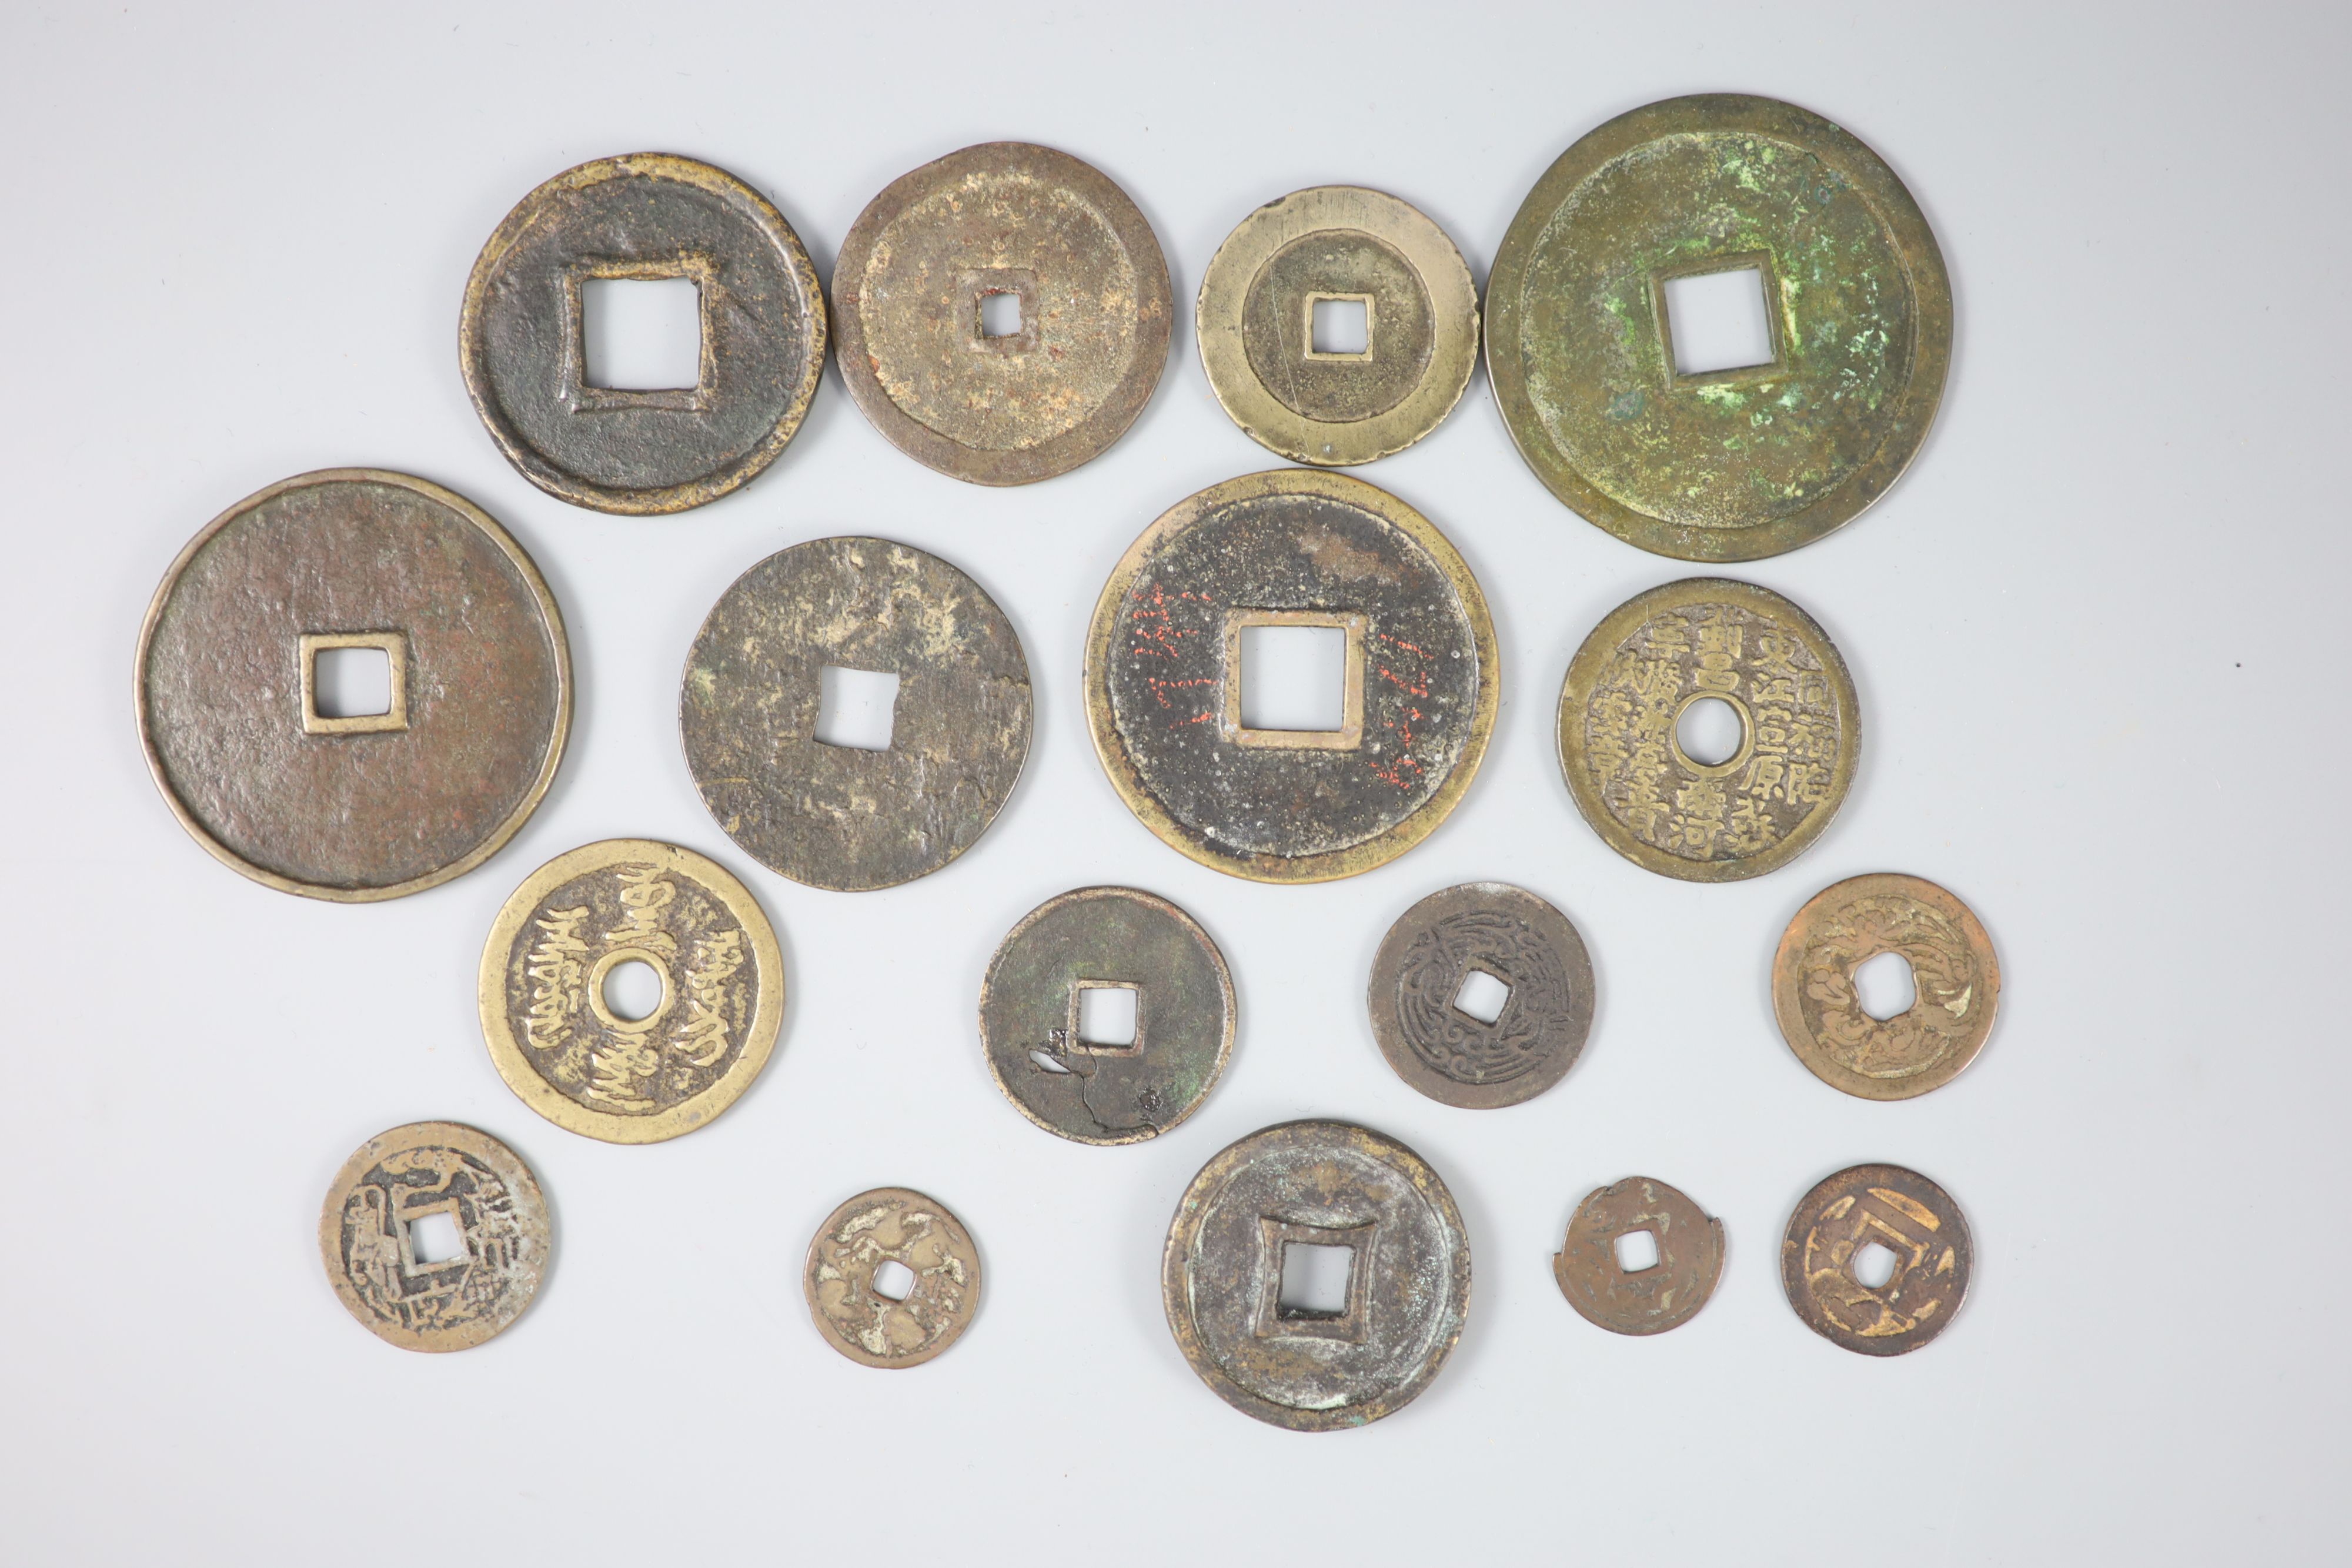 China, a group of 17 bronze or copper inscribed charms or amulets, Qing dynasty,